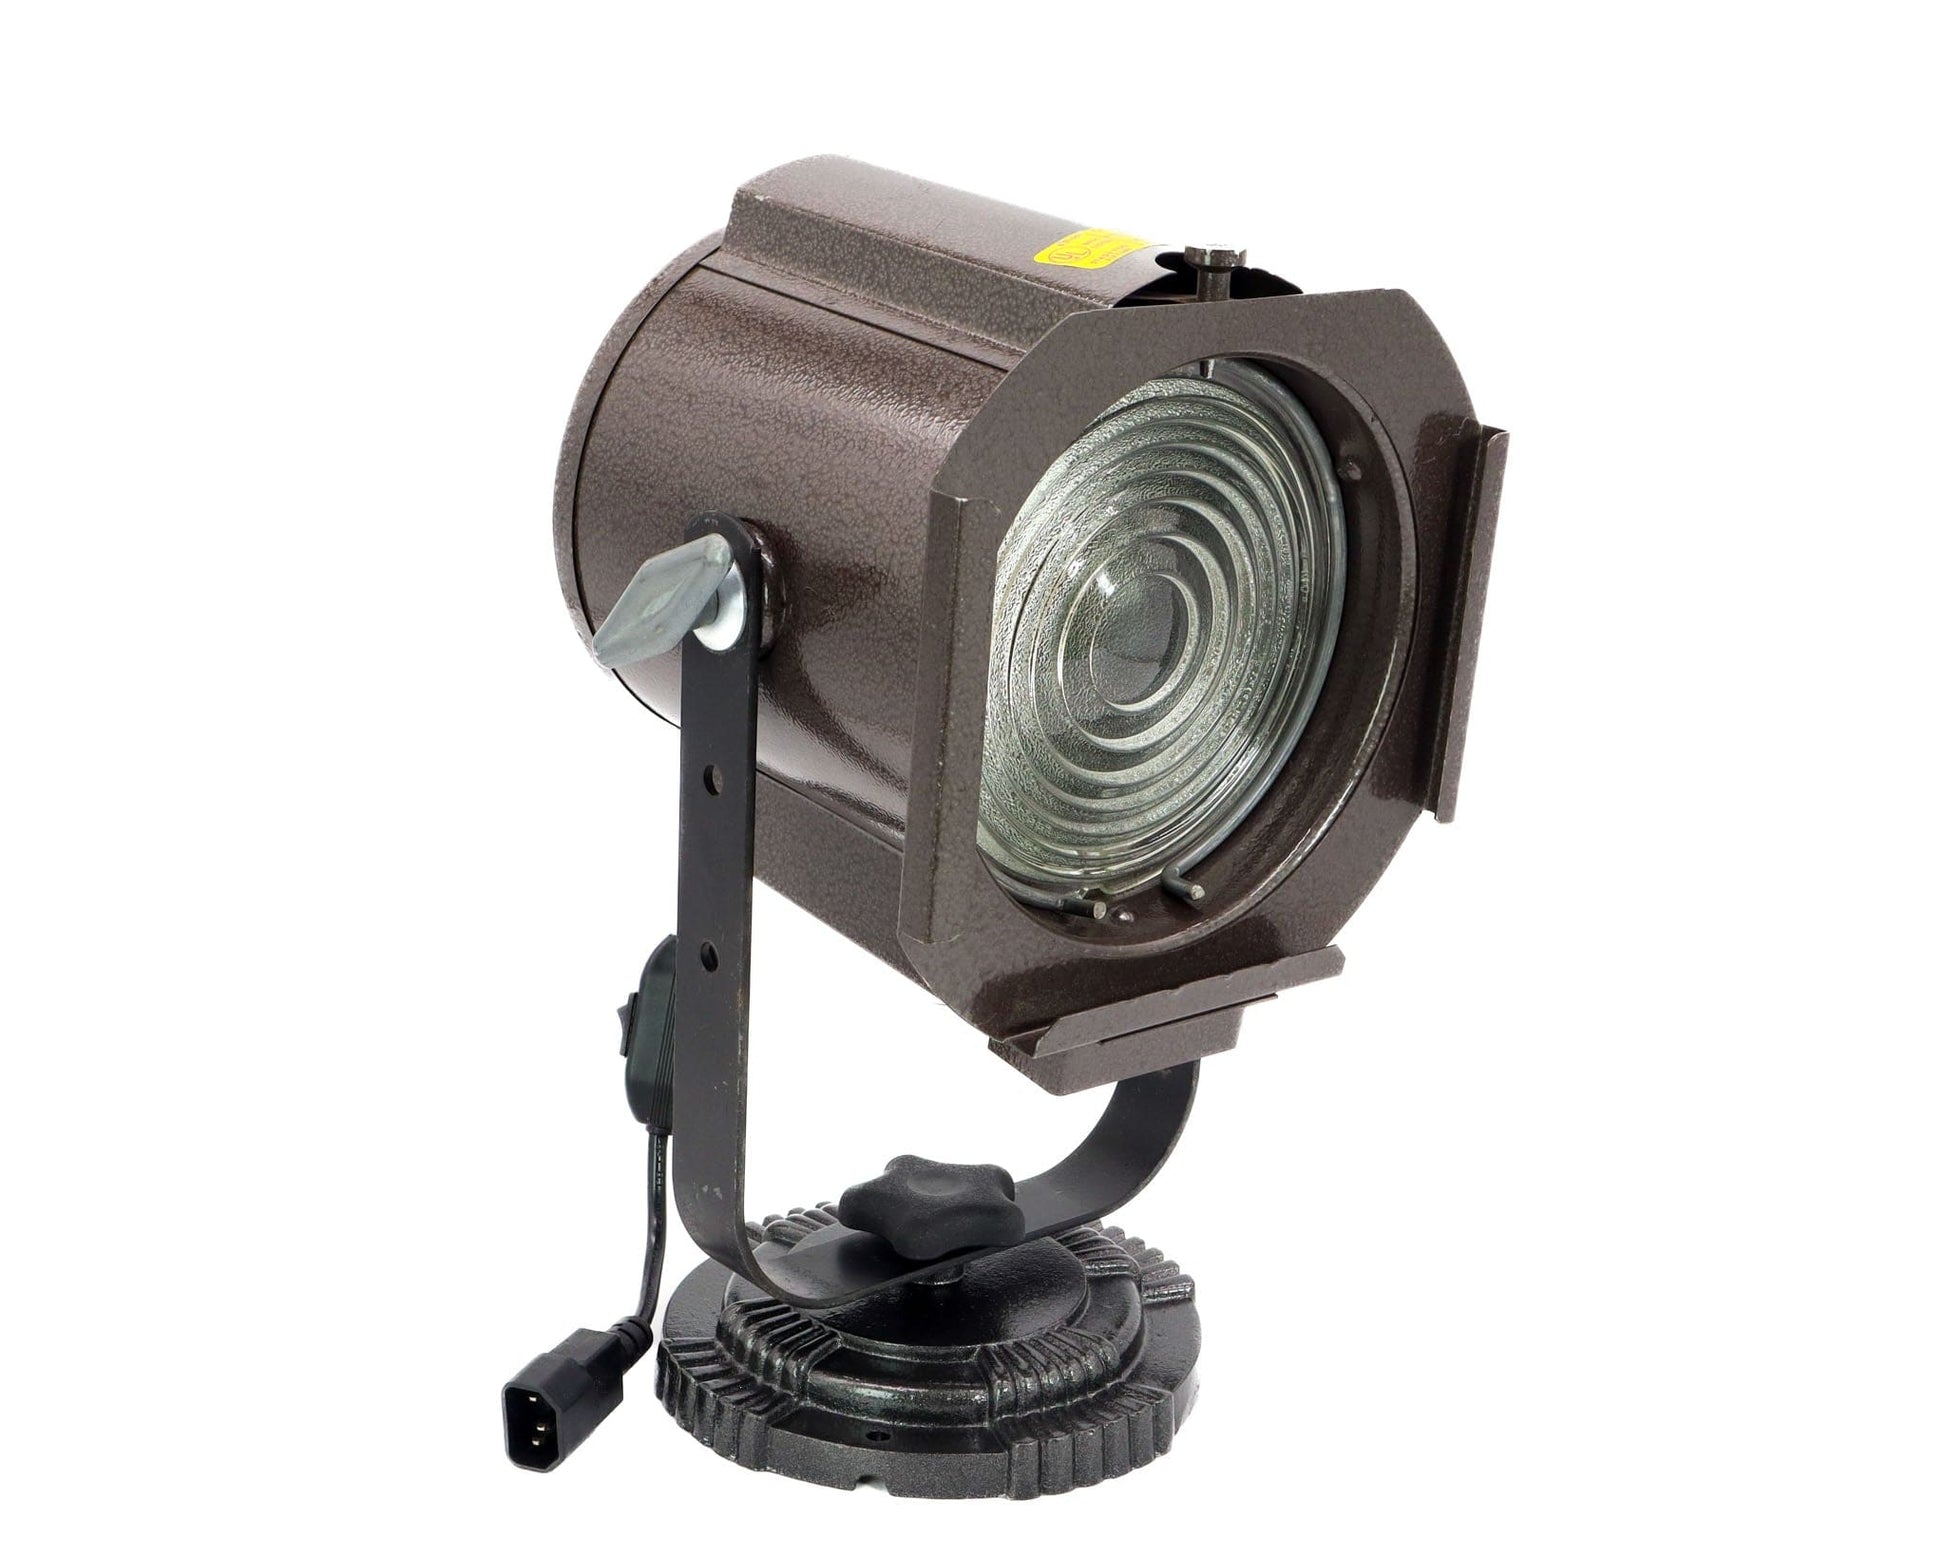 LightAndTimeArt Flood & Spot Lights Small, Gray Stage light with Colored Lenses, Home Theater & Movie Room Decor